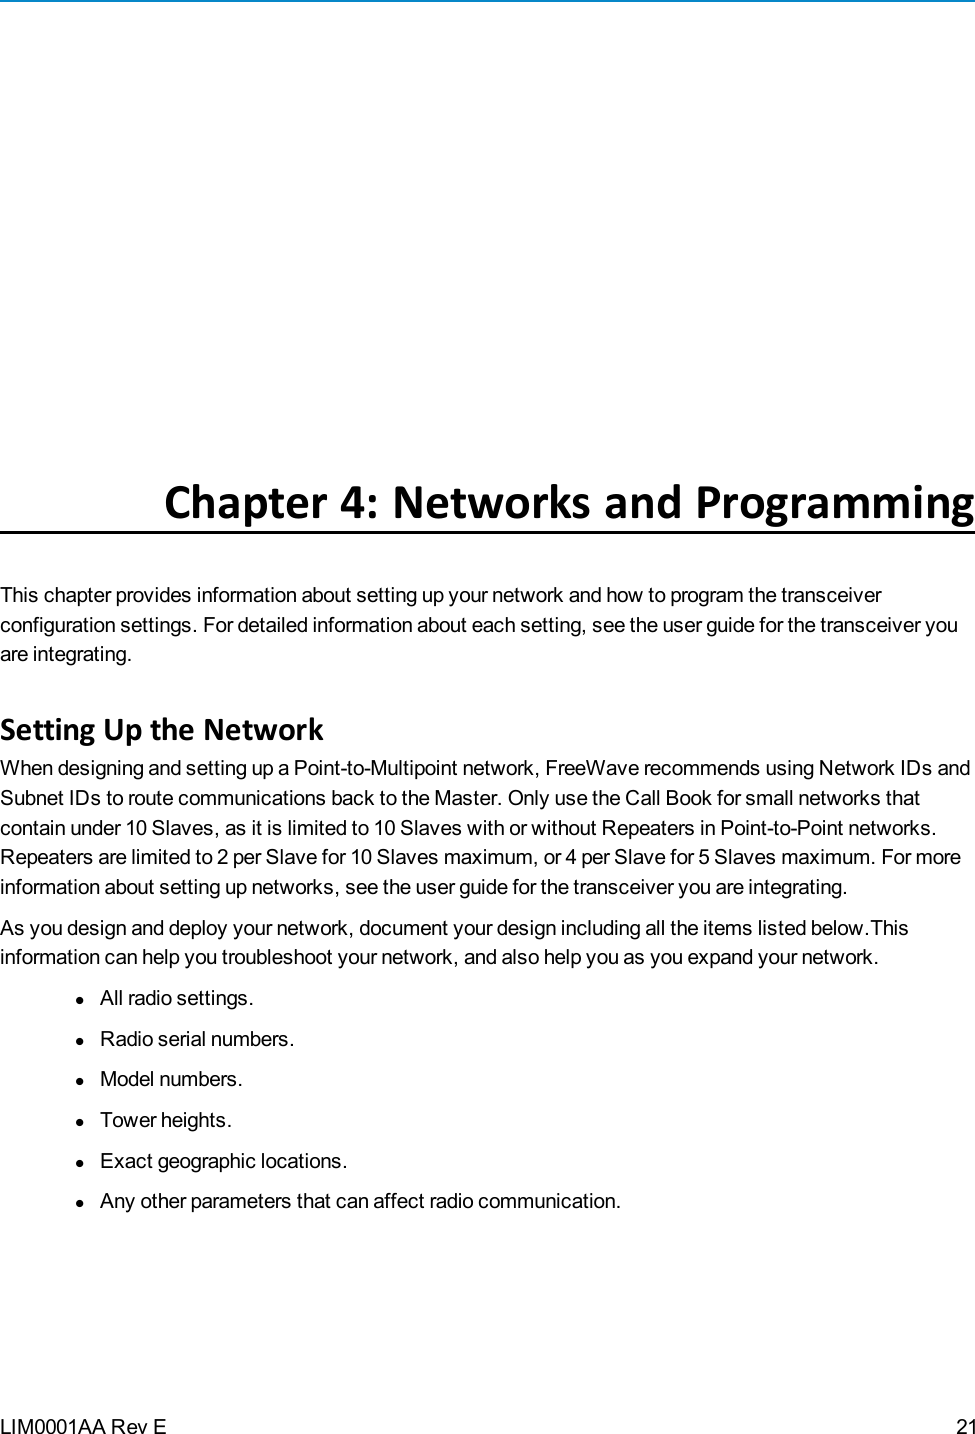 LIM0001AA Rev EChapter 4: Networks and ProgrammingThis chapter provides information about setting up your network and how to program the transceiverconfiguration settings. For detailed information about each setting, see the user guide for the transceiver youare integrating.Setting Up the NetworkWhen designing and setting up a Point-to-Multipoint network, FreeWave recommends using Network IDs andSubnet IDs to route communications back to the Master. Only use the Call Book for small networks thatcontain under 10 Slaves, as it is limited to 10 Slaves with or without Repeaters in Point-to-Point networks.Repeaters are limited to 2 per Slave for 10 Slaves maximum, or 4 per Slave for 5 Slaves maximum. For moreinformation about setting up networks, see the user guide for the transceiver you are integrating.As you design and deploy your network, document your design including all theitems listed below.Thisinformation can help you troubleshoot your network, and also help you as you expand your network.lAll radio settings.lRadio serial numbers.lModel numbers.lTower heights.lExact geographic locations.lAny other parameters that can affect radio communication.21